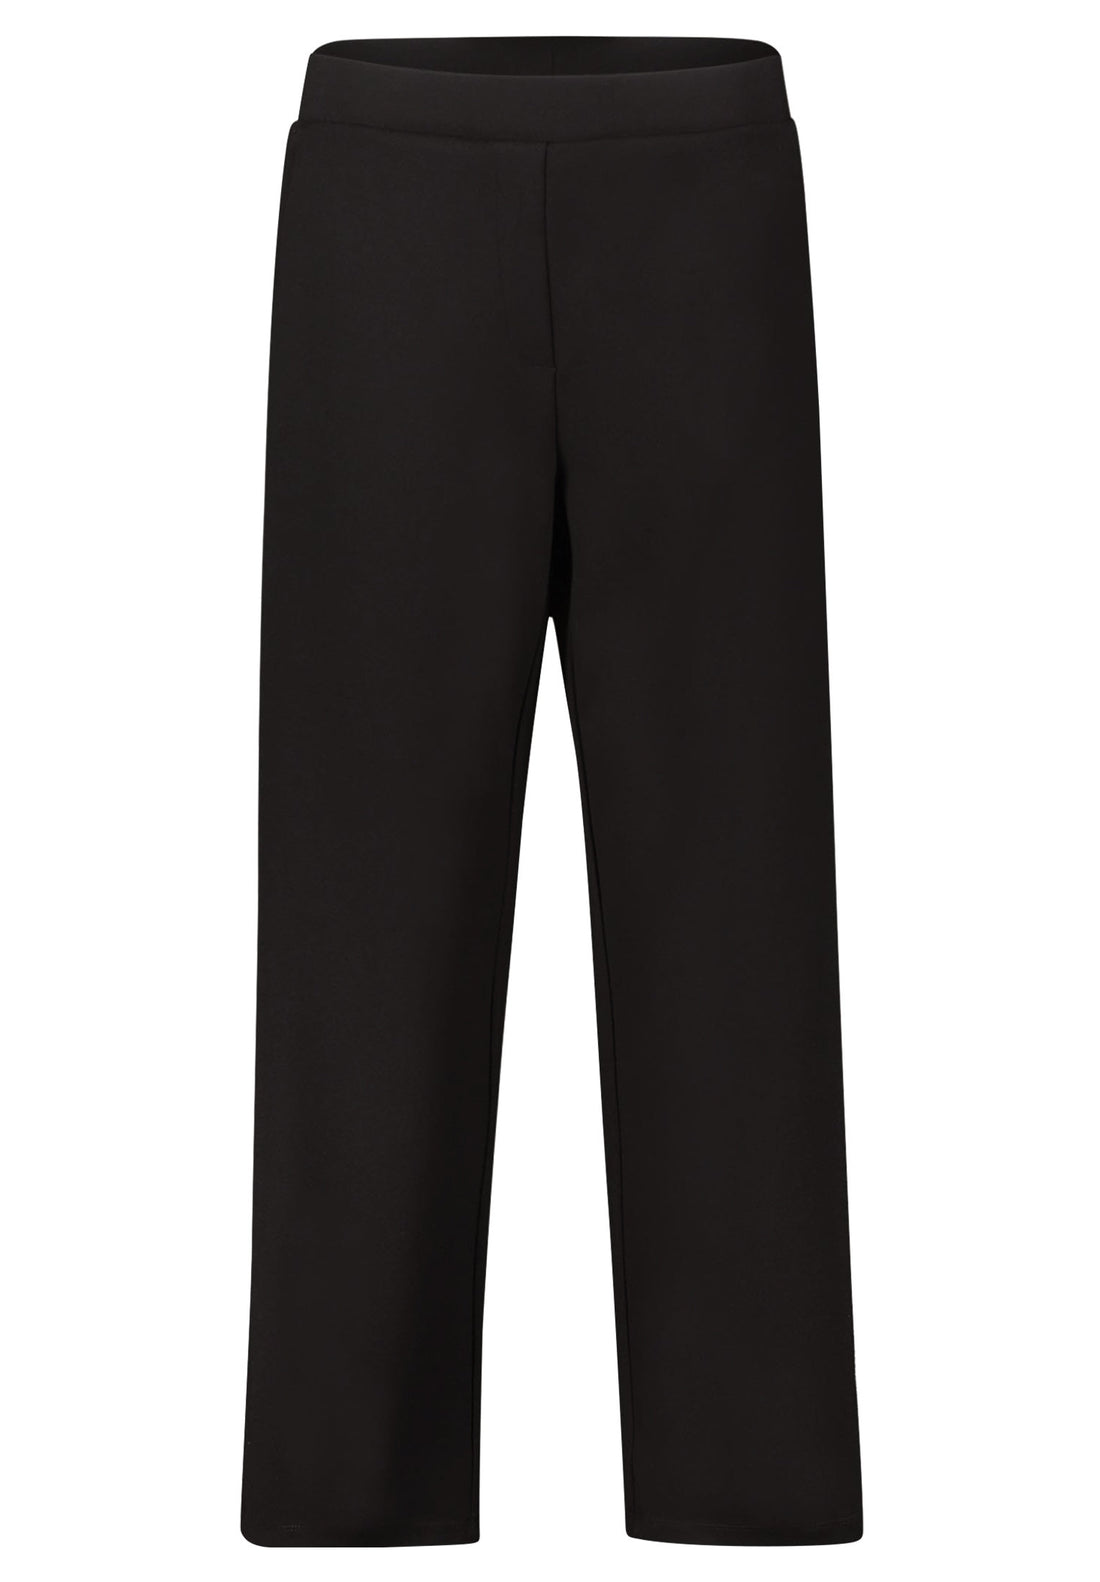 Black Cropped Slip On Trousers_6822-2250_9045_01